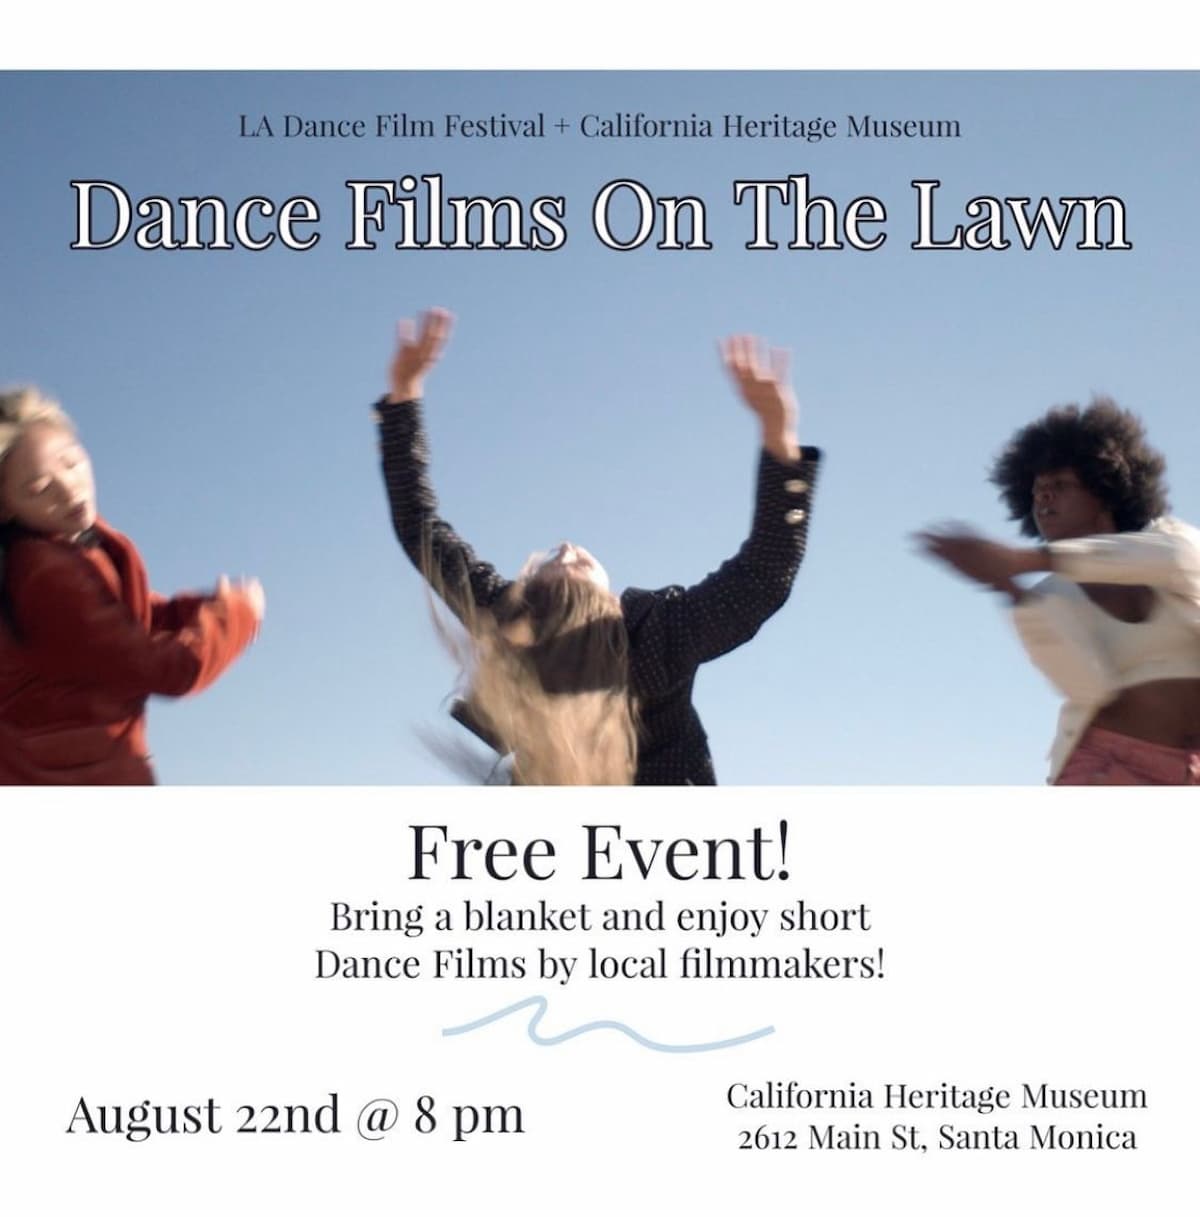 Dance Films on the Lawn